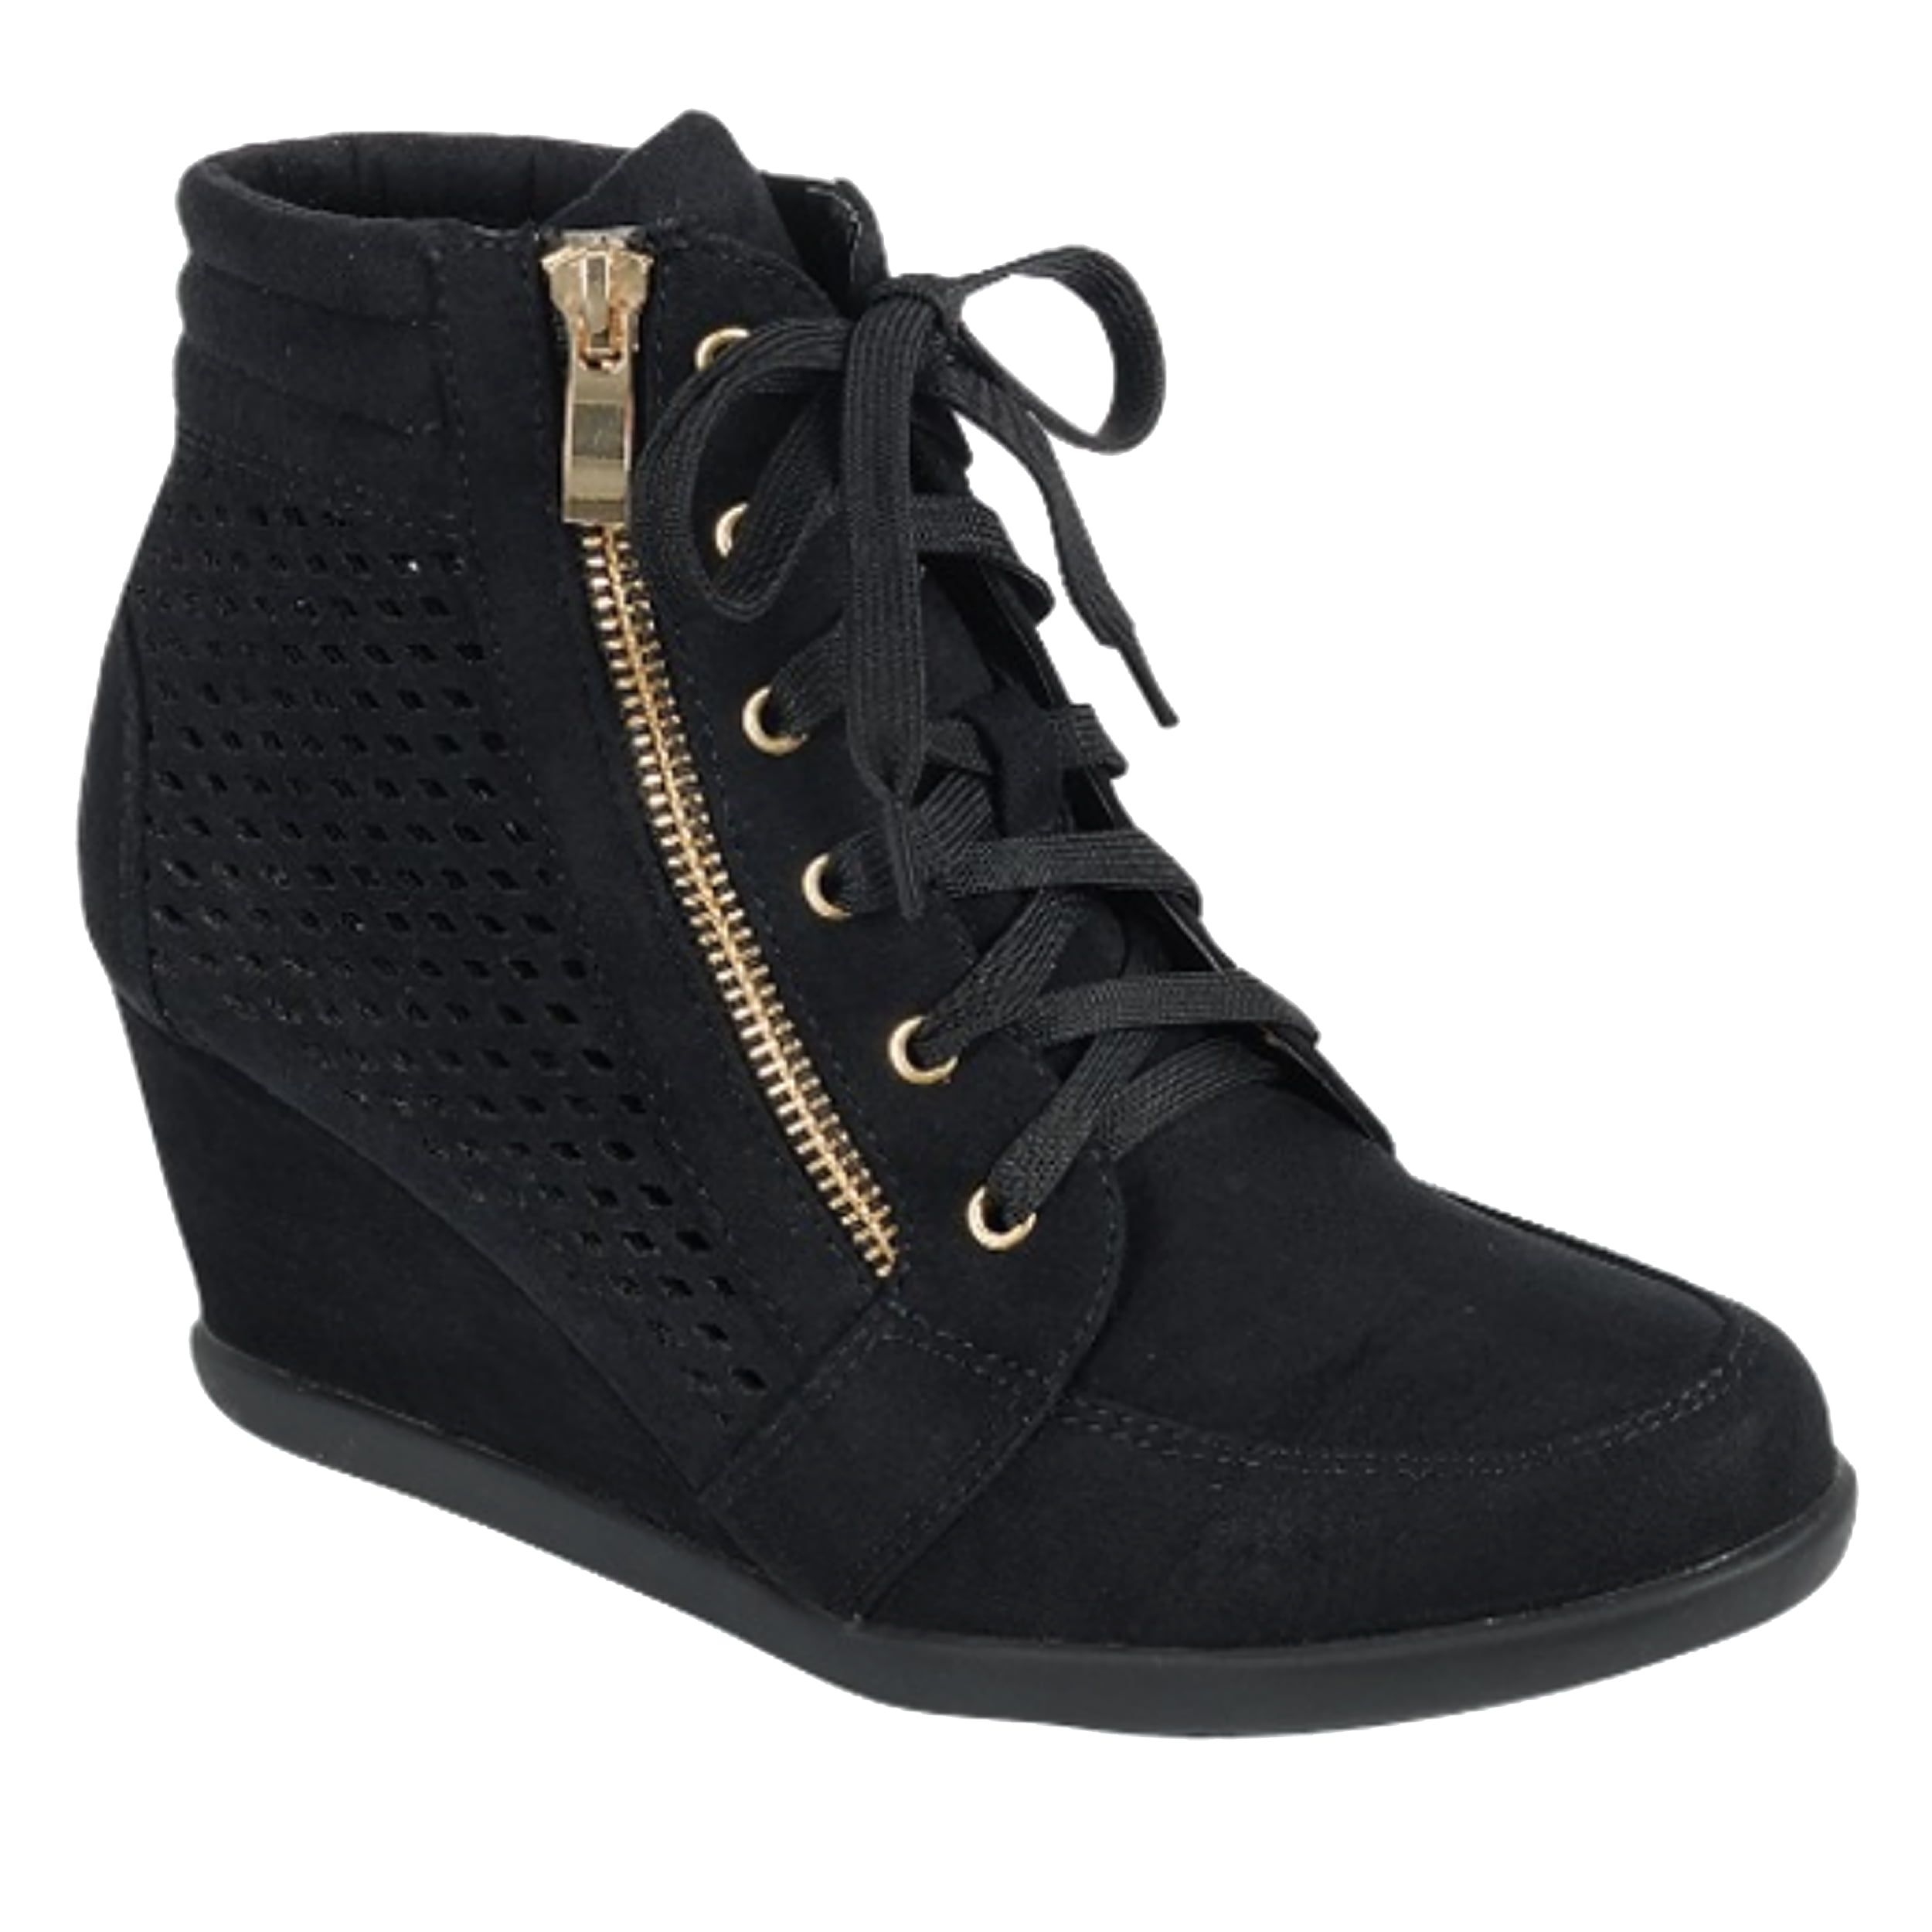 Women High Top Wedge Heel Sneakers Platform Lace Up Shoes Ankle Bootie ...